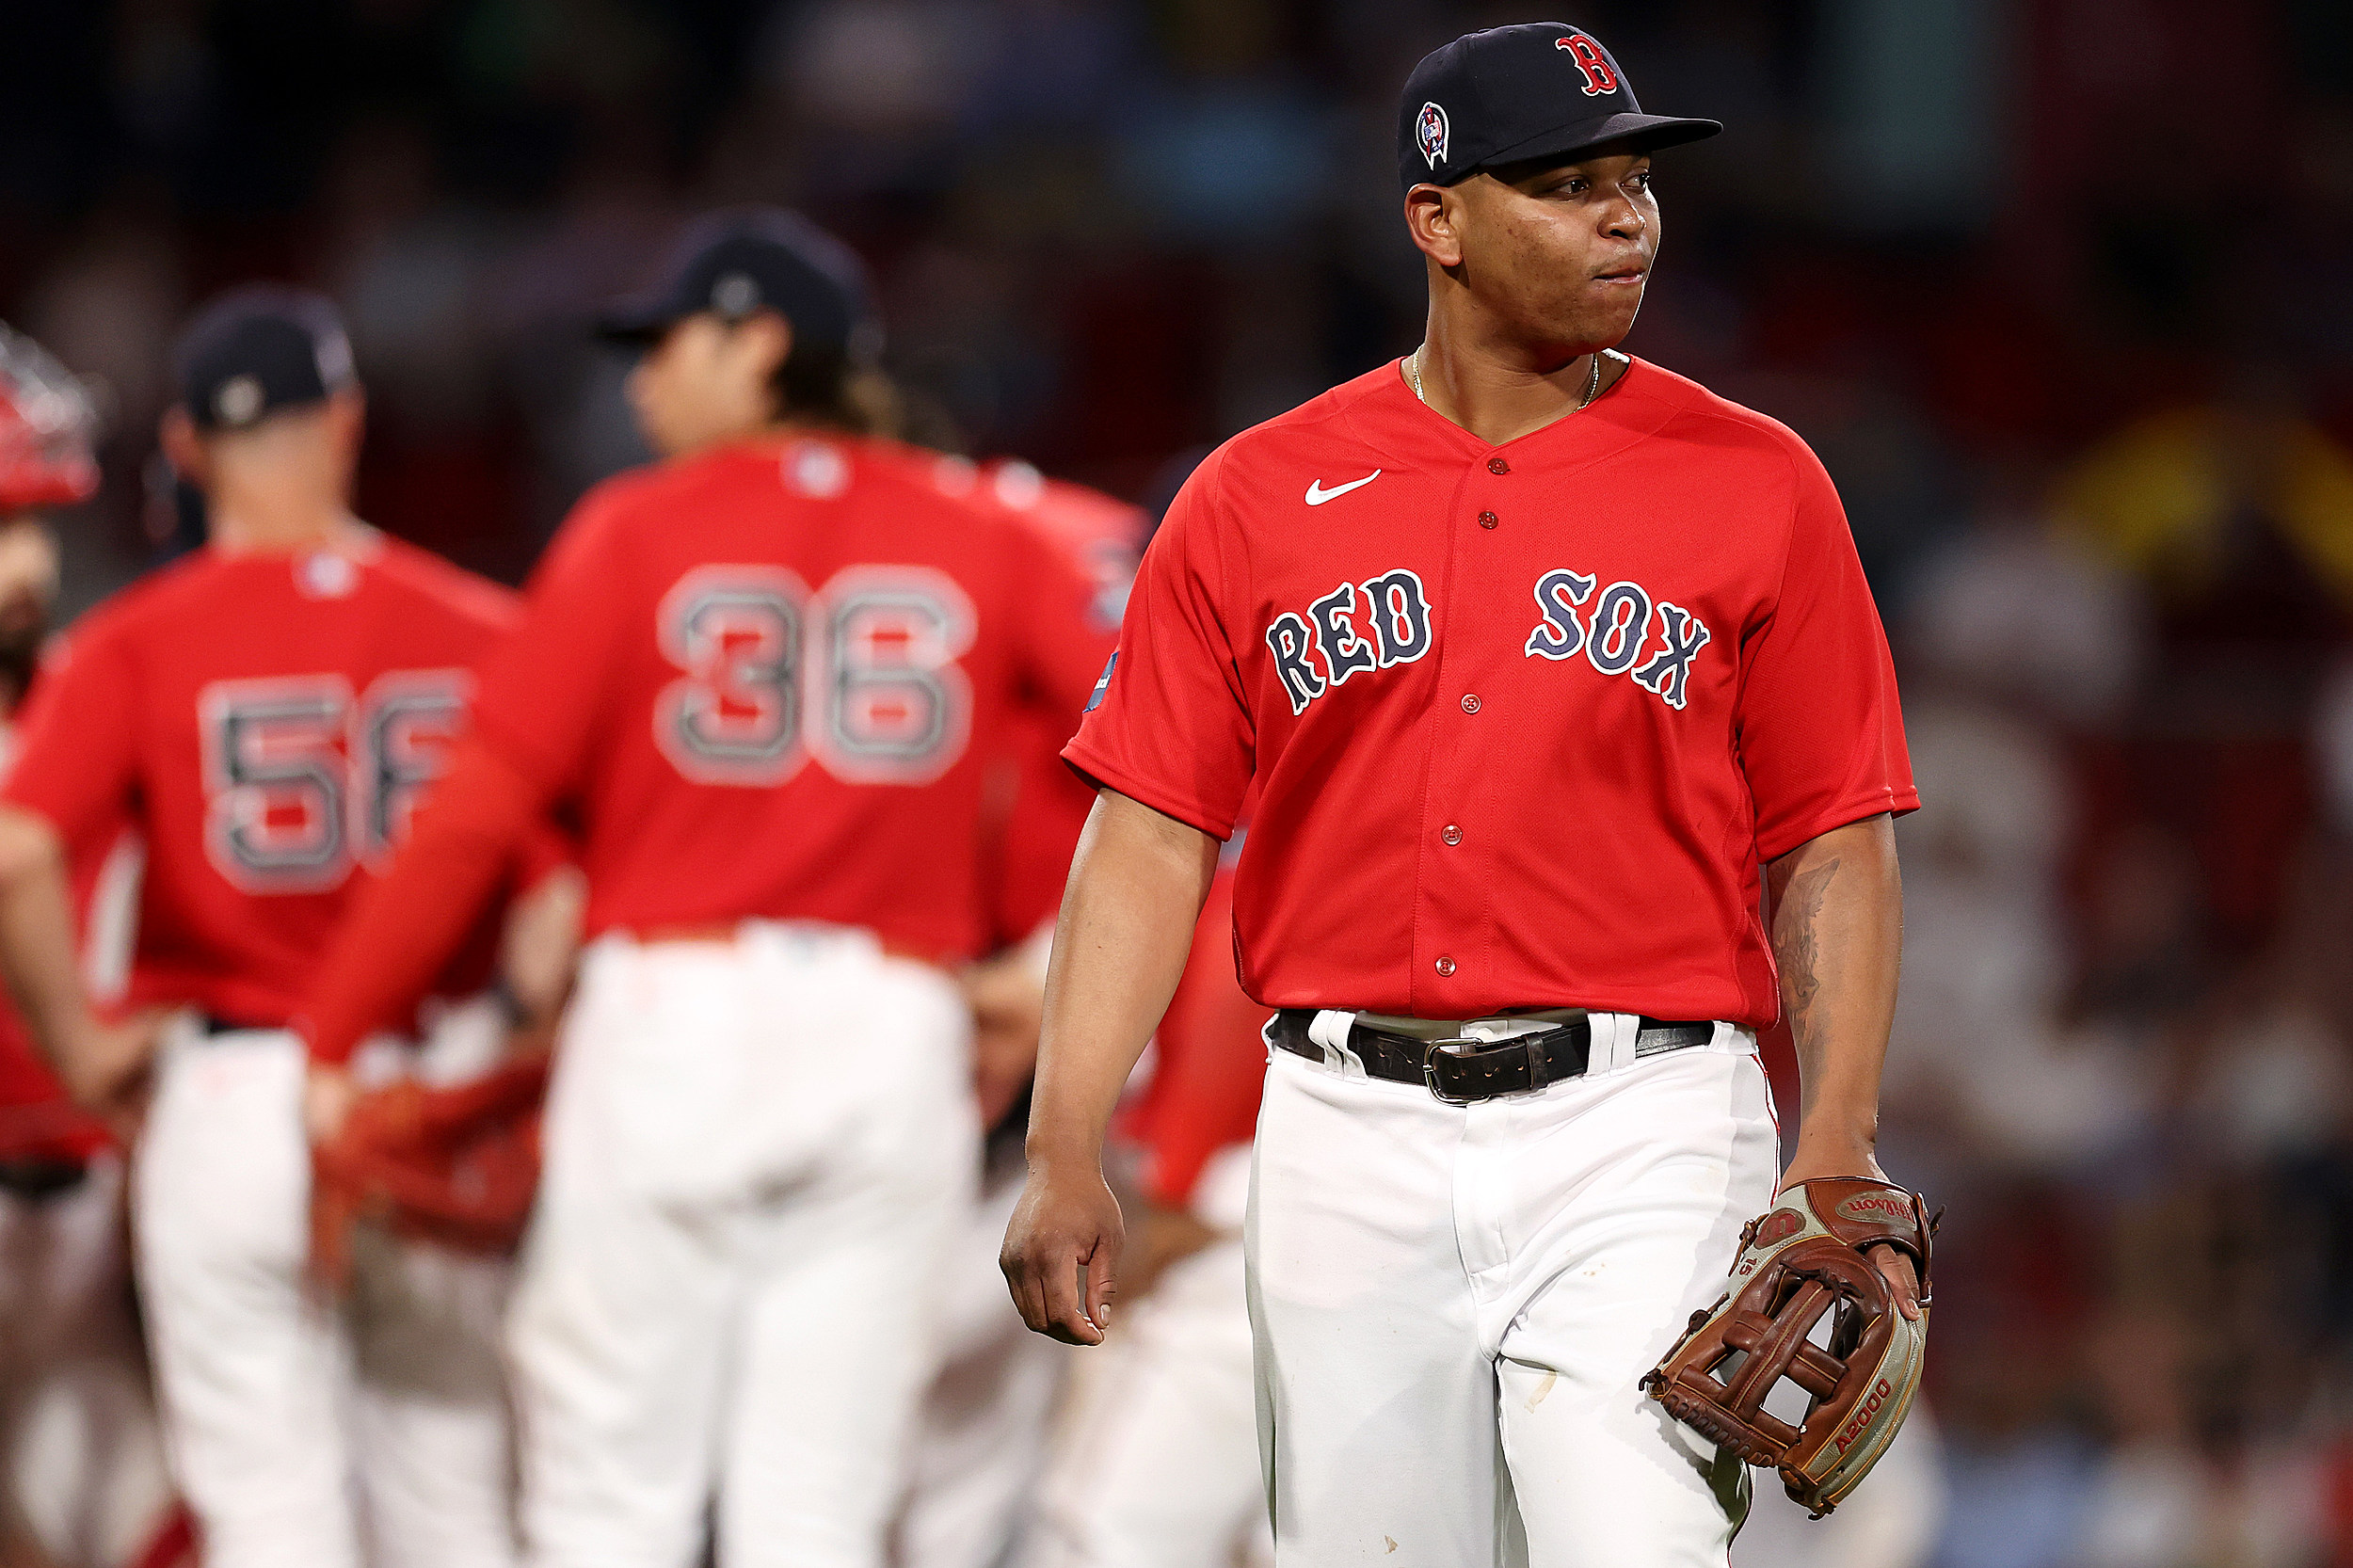 Rafael Devers homers, Kenley Jansen records first save at Fenway